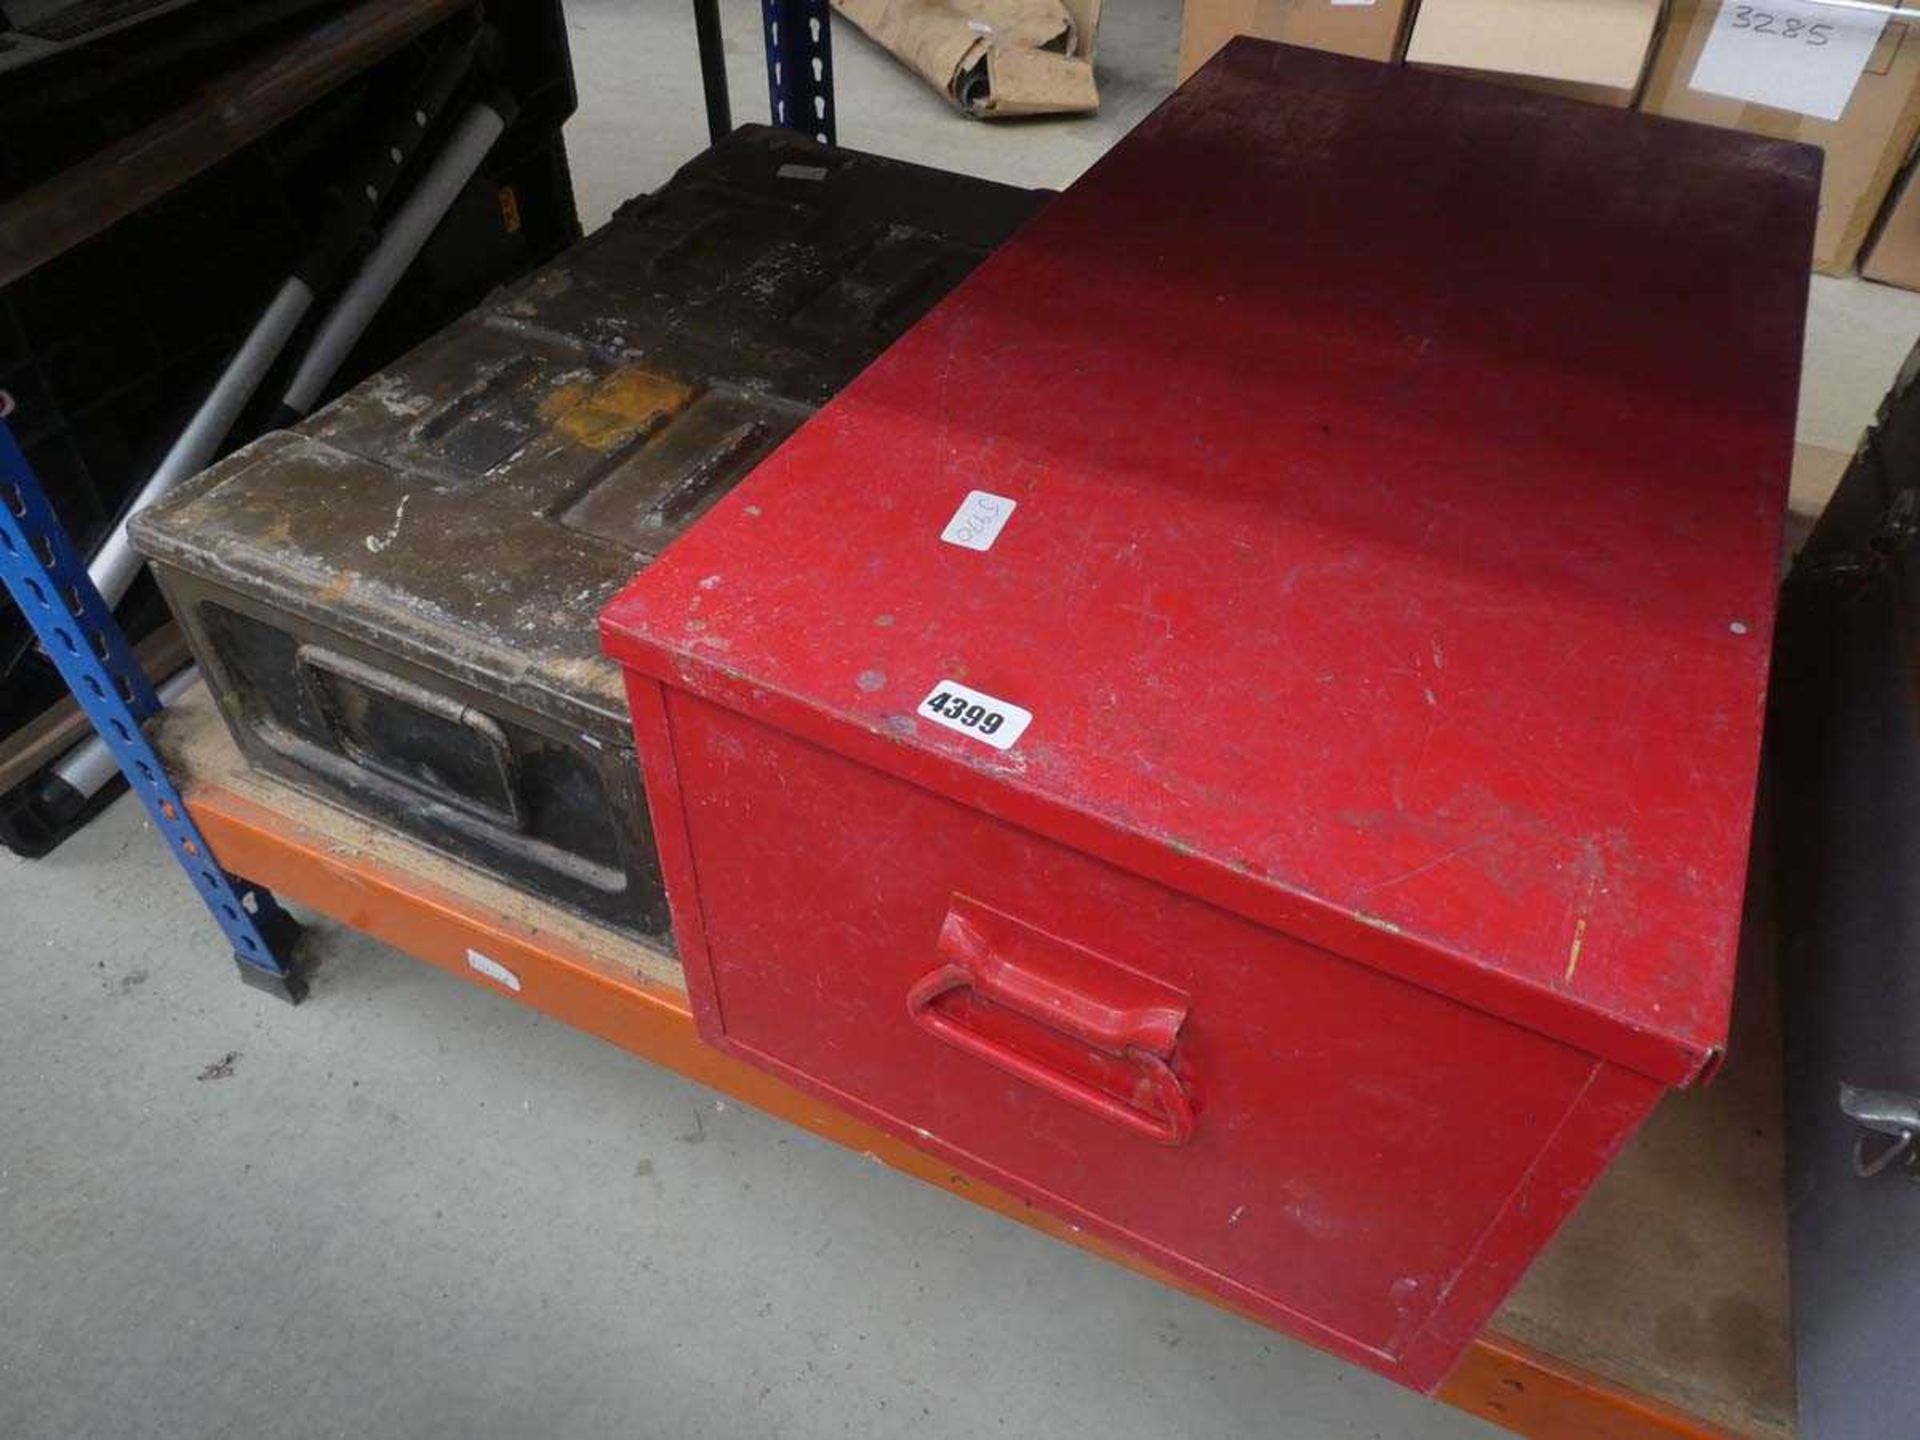 Military style ammo tin and red metal toolbox